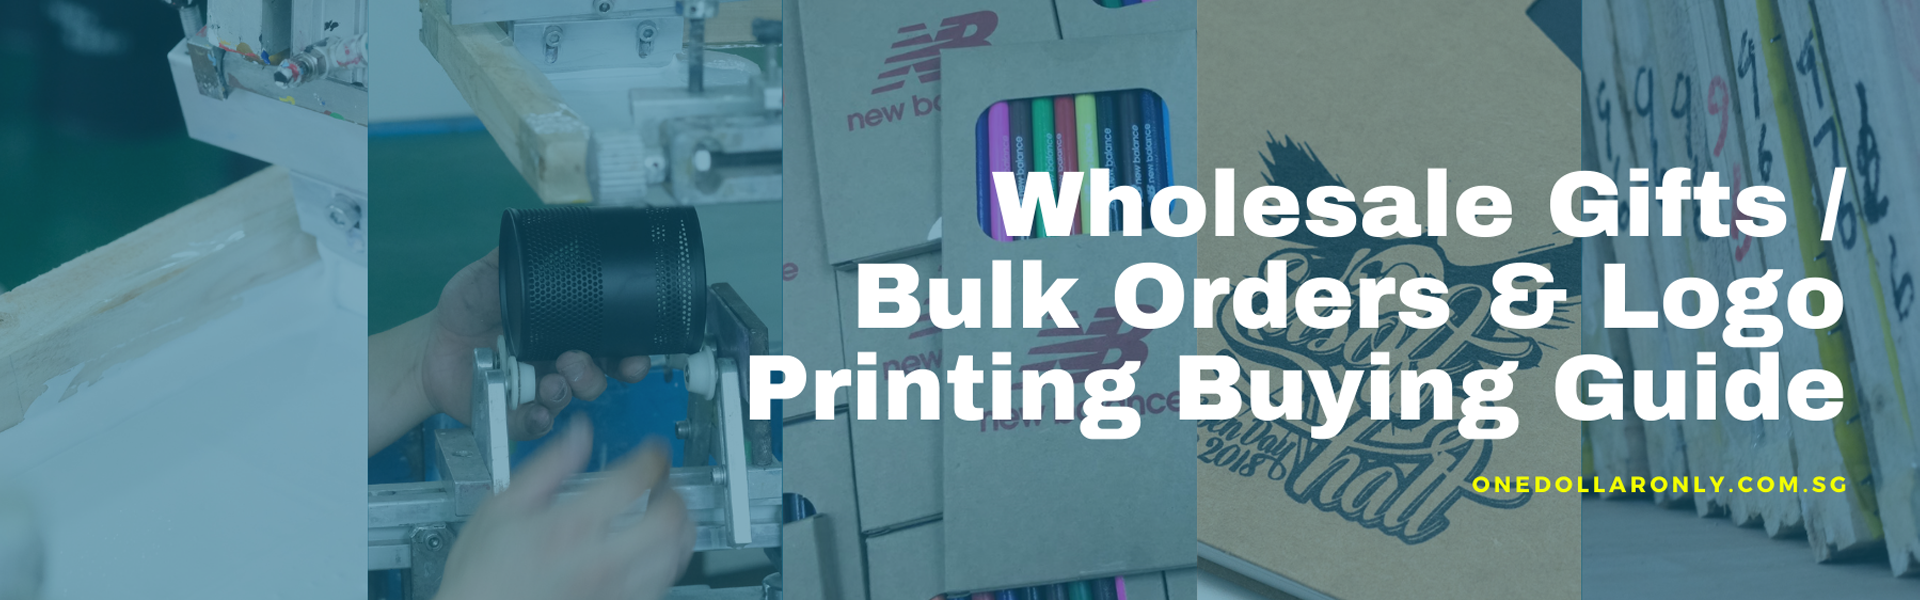 Wholesale One Dollar Only Stationery and Gift Shop - Wholesale Gifts, Bulk Orders & Logo Printing Buying Guide